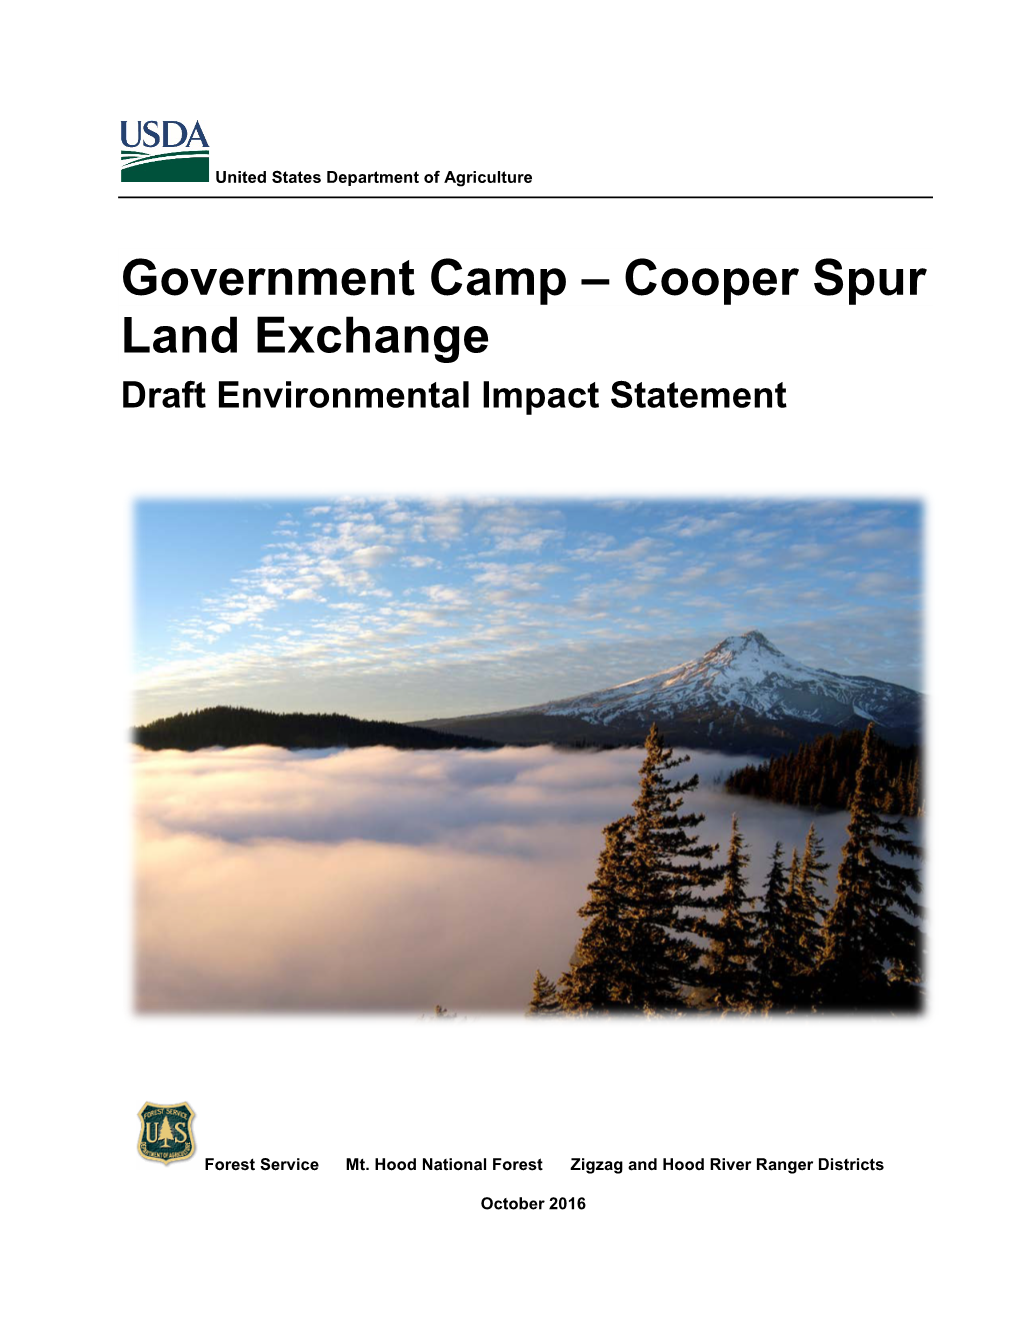 Government Camp – Cooper Spur Land Exchange Draft Environmental Impact Statement